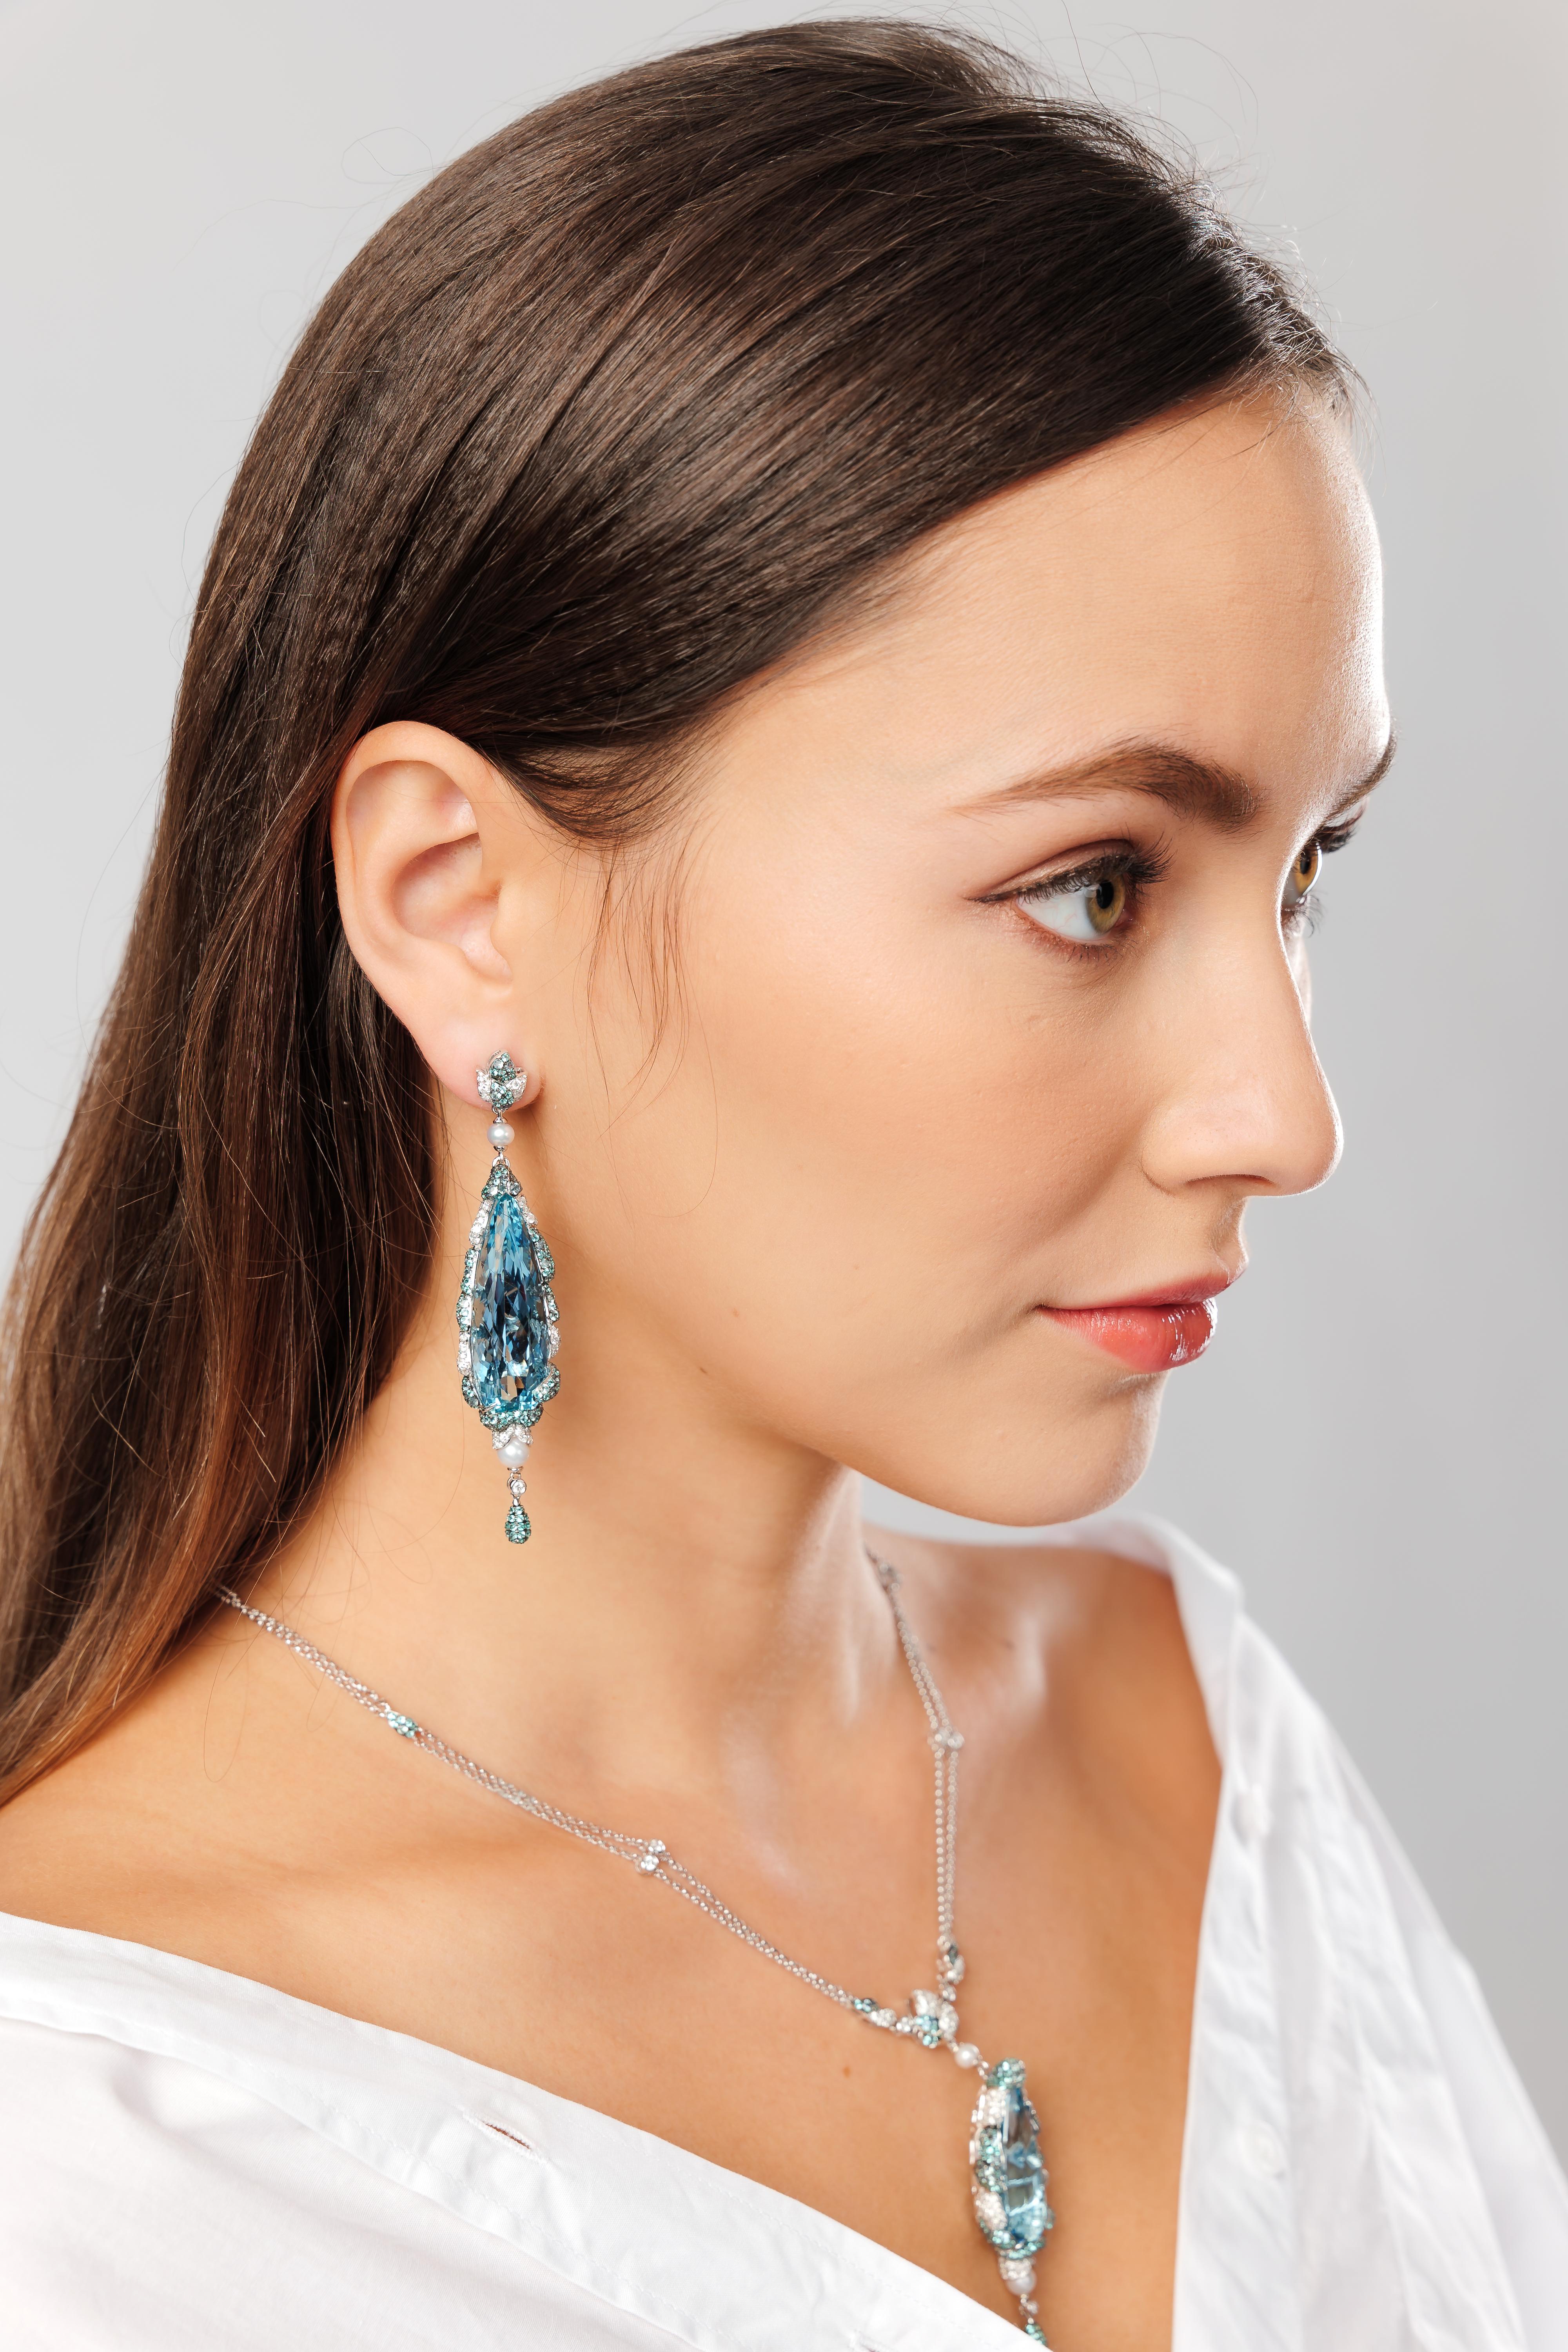 Contemporary 44.1 Carat Aquamarine Earrings in 18 Karat White Gold with Paraiba & Alexandrite For Sale